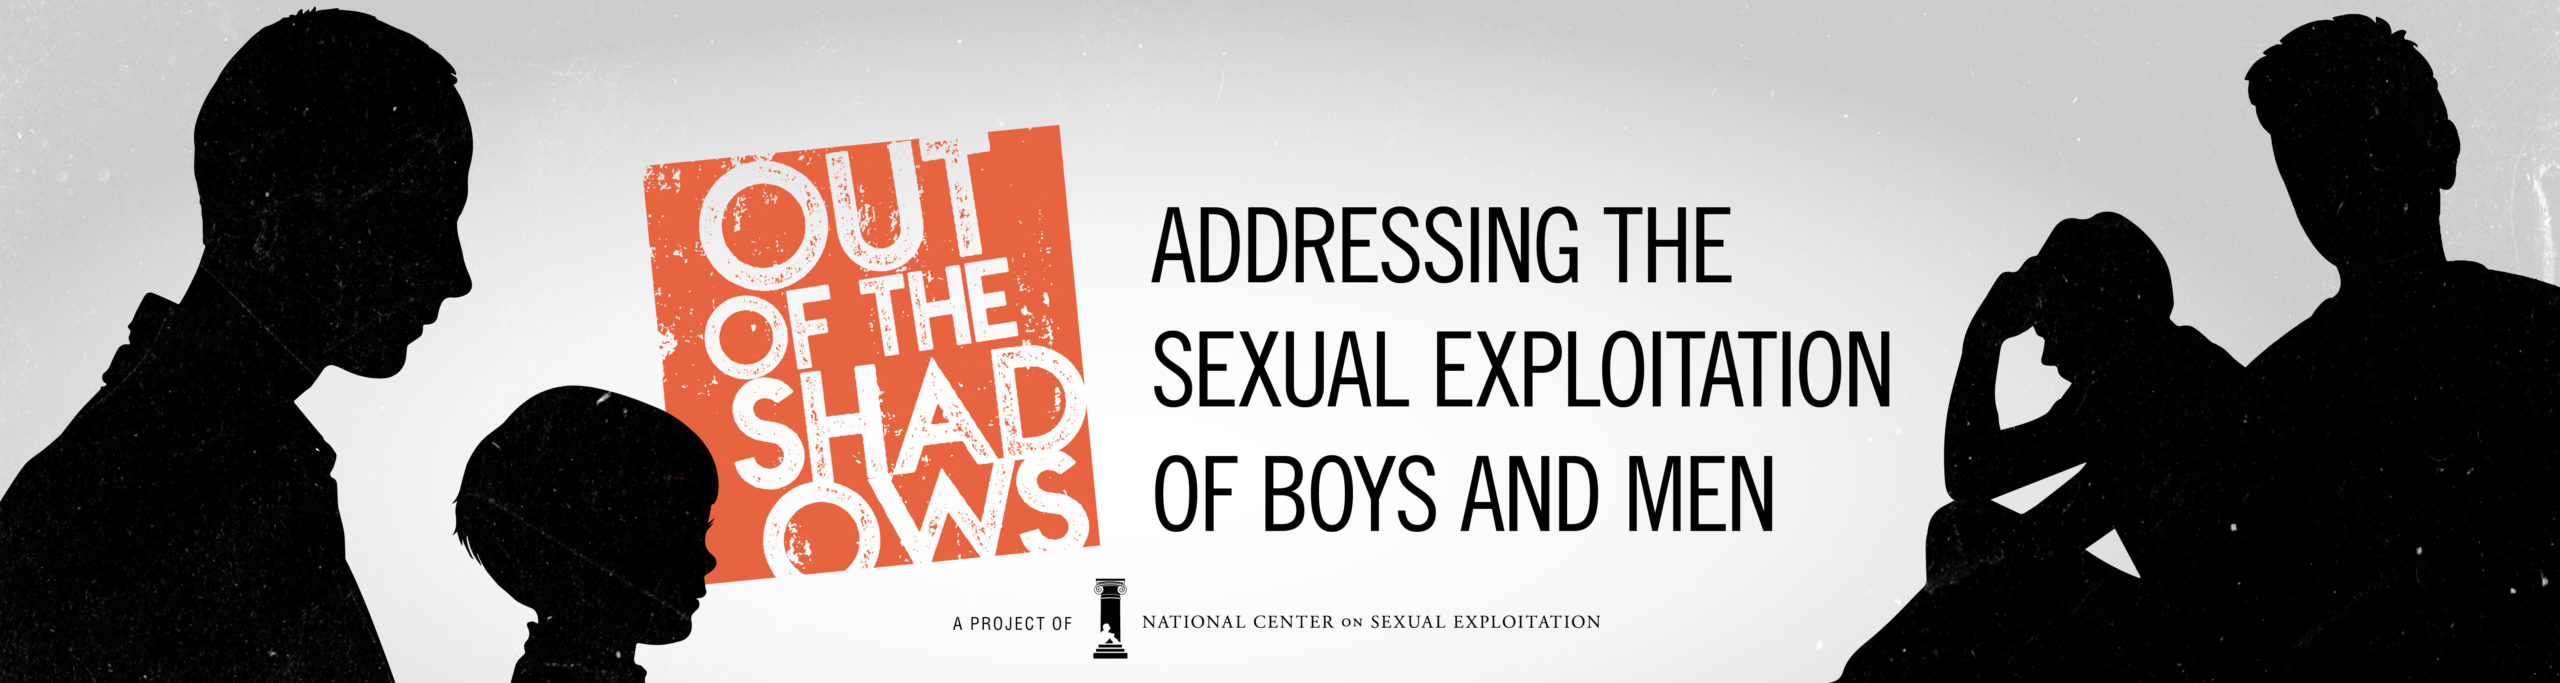 Out of the Shadows - Exploitation of Boys and Men